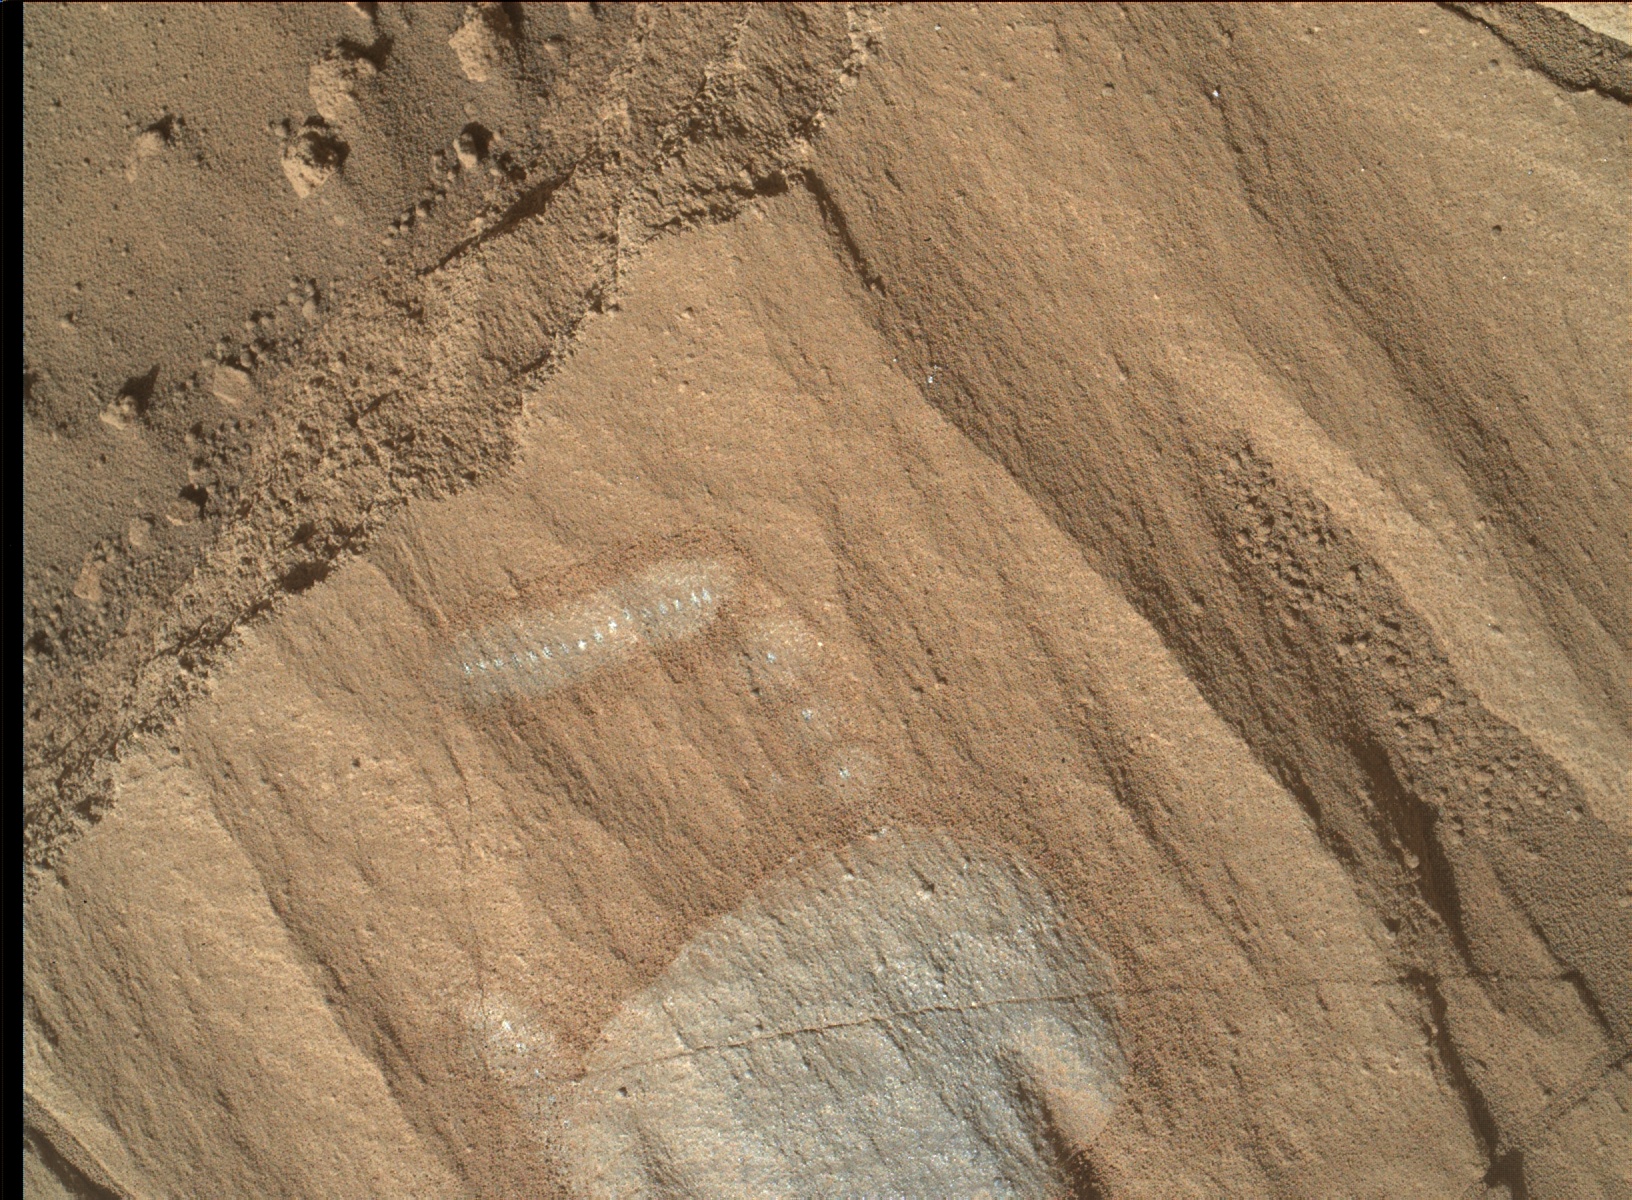 Nasa's Mars rover Curiosity acquired this image using its Mars Hand Lens Imager (MAHLI) on Sol 1320